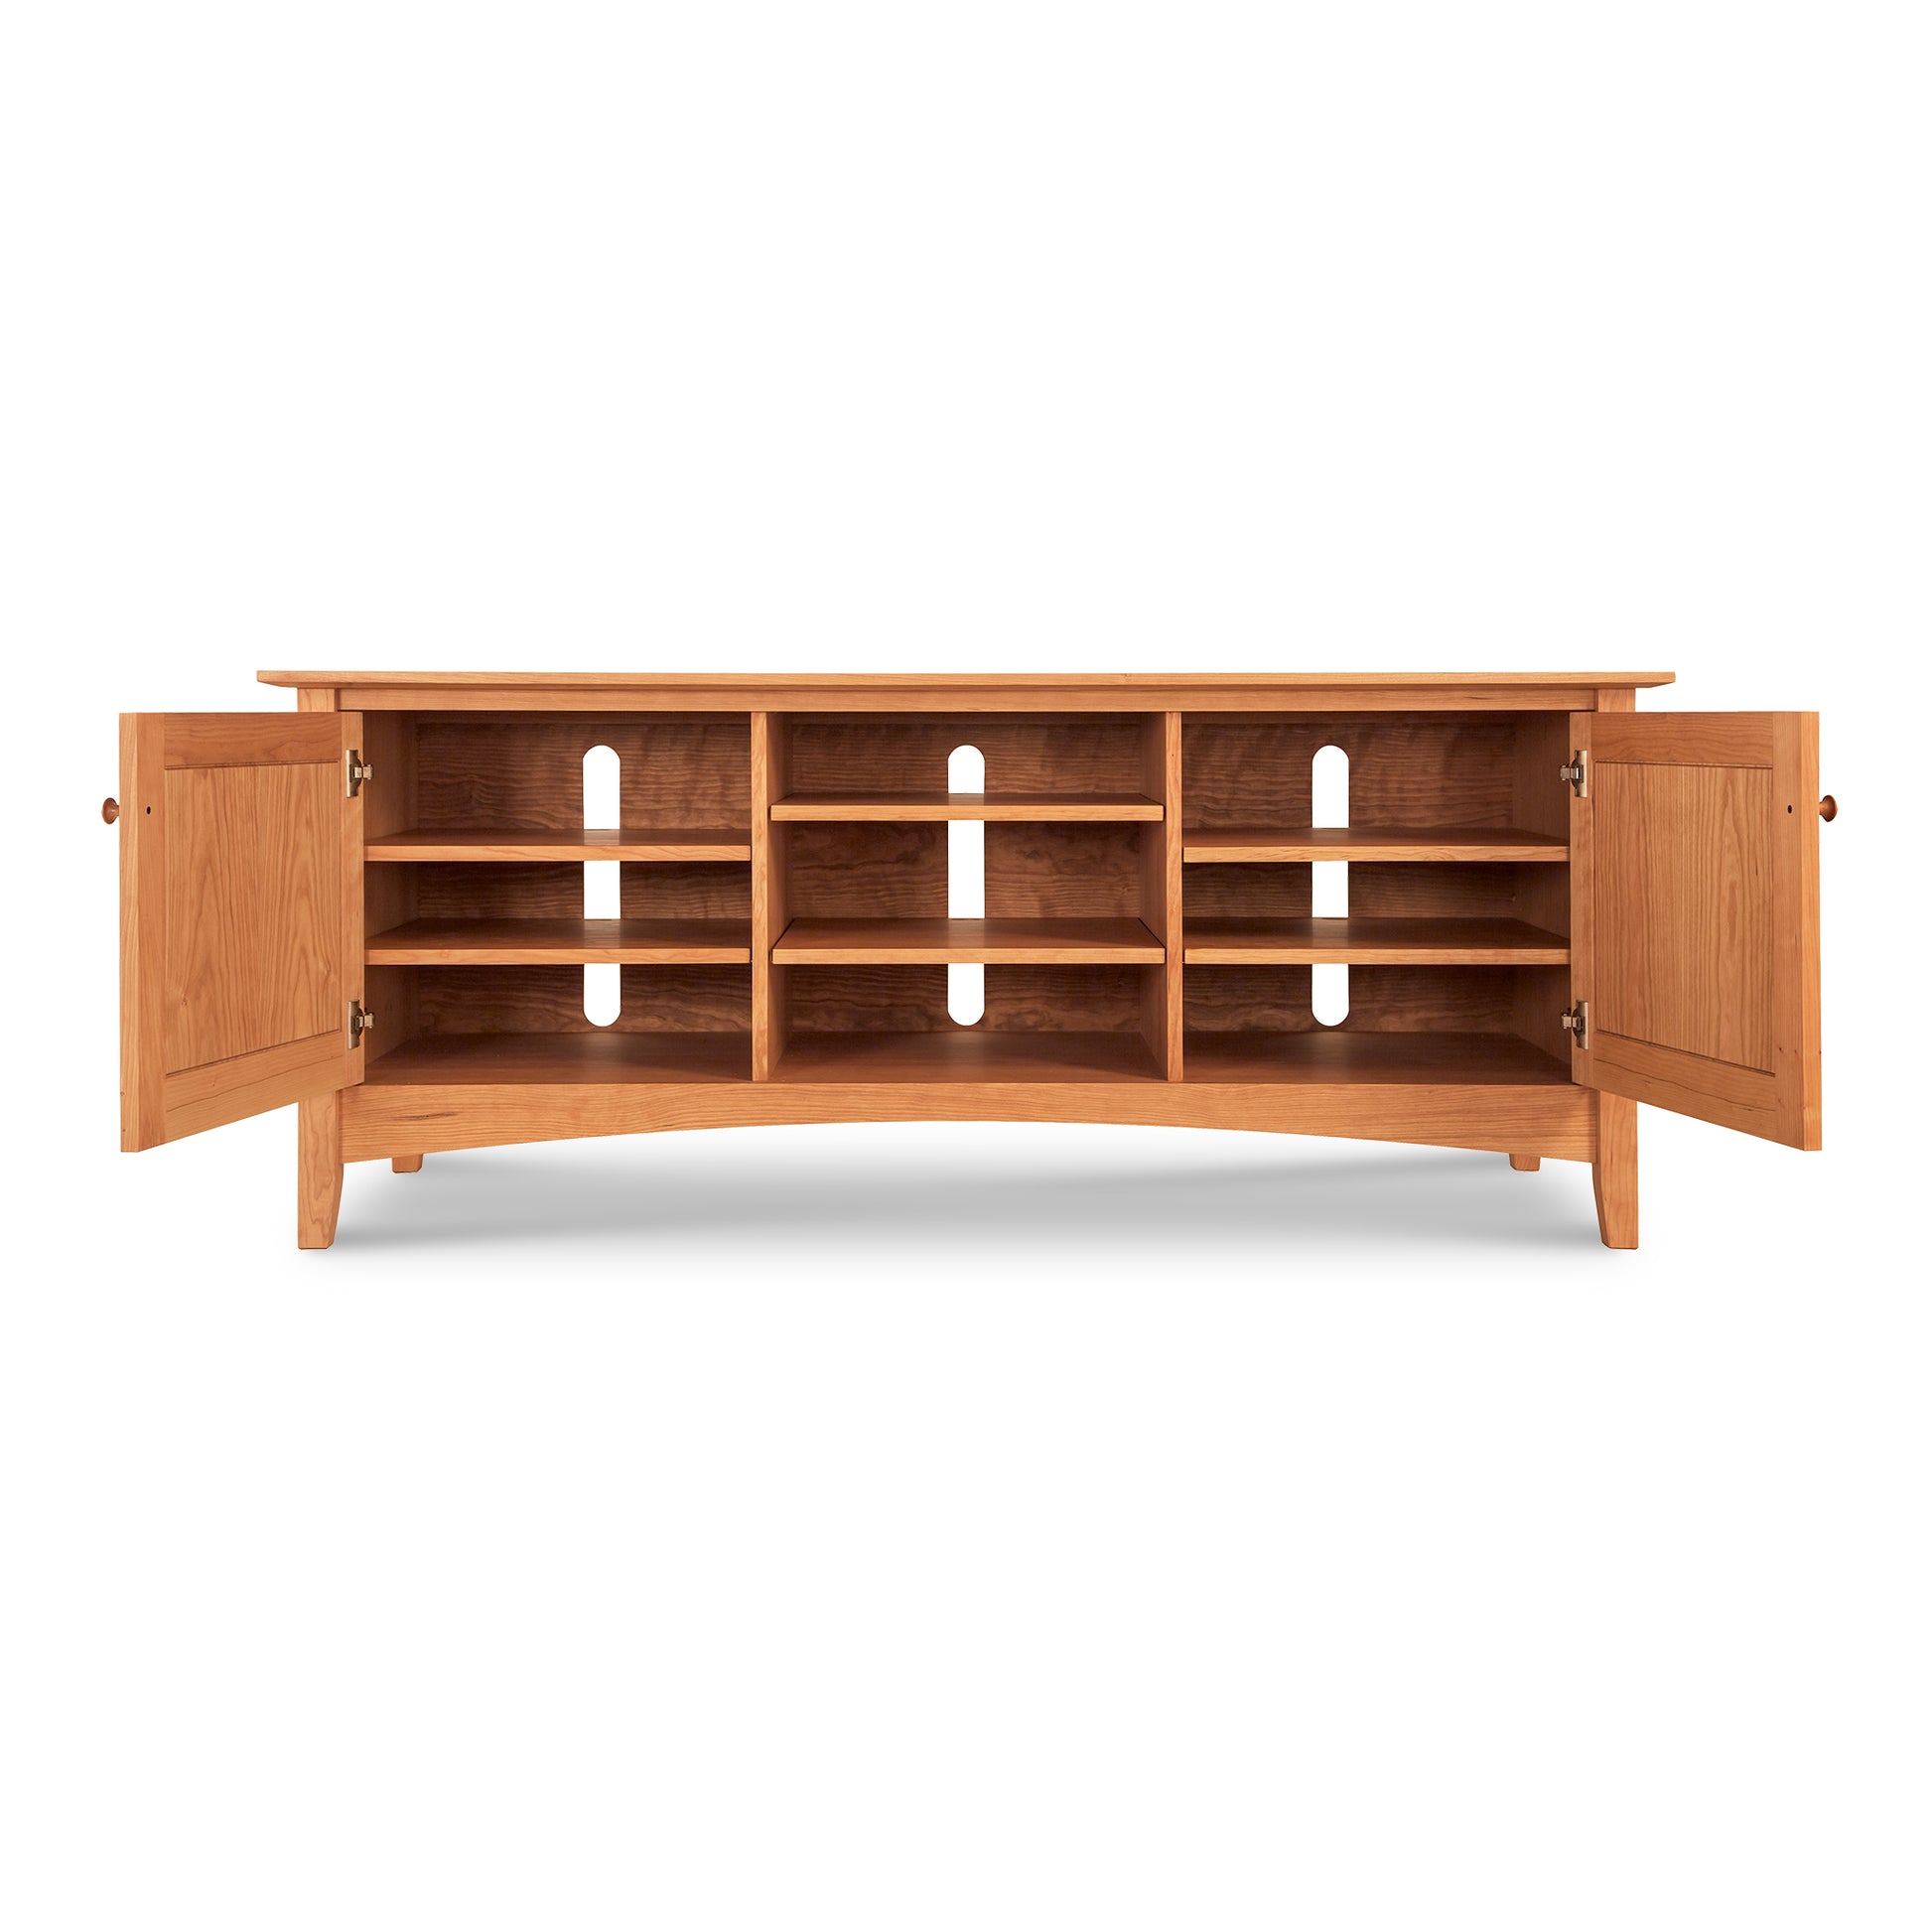 An Maple Corner Woodworks American Shaker 67" TV stand crafted from solid hardwoods, featuring open shelves and two side cabinets, isolated on a white background.